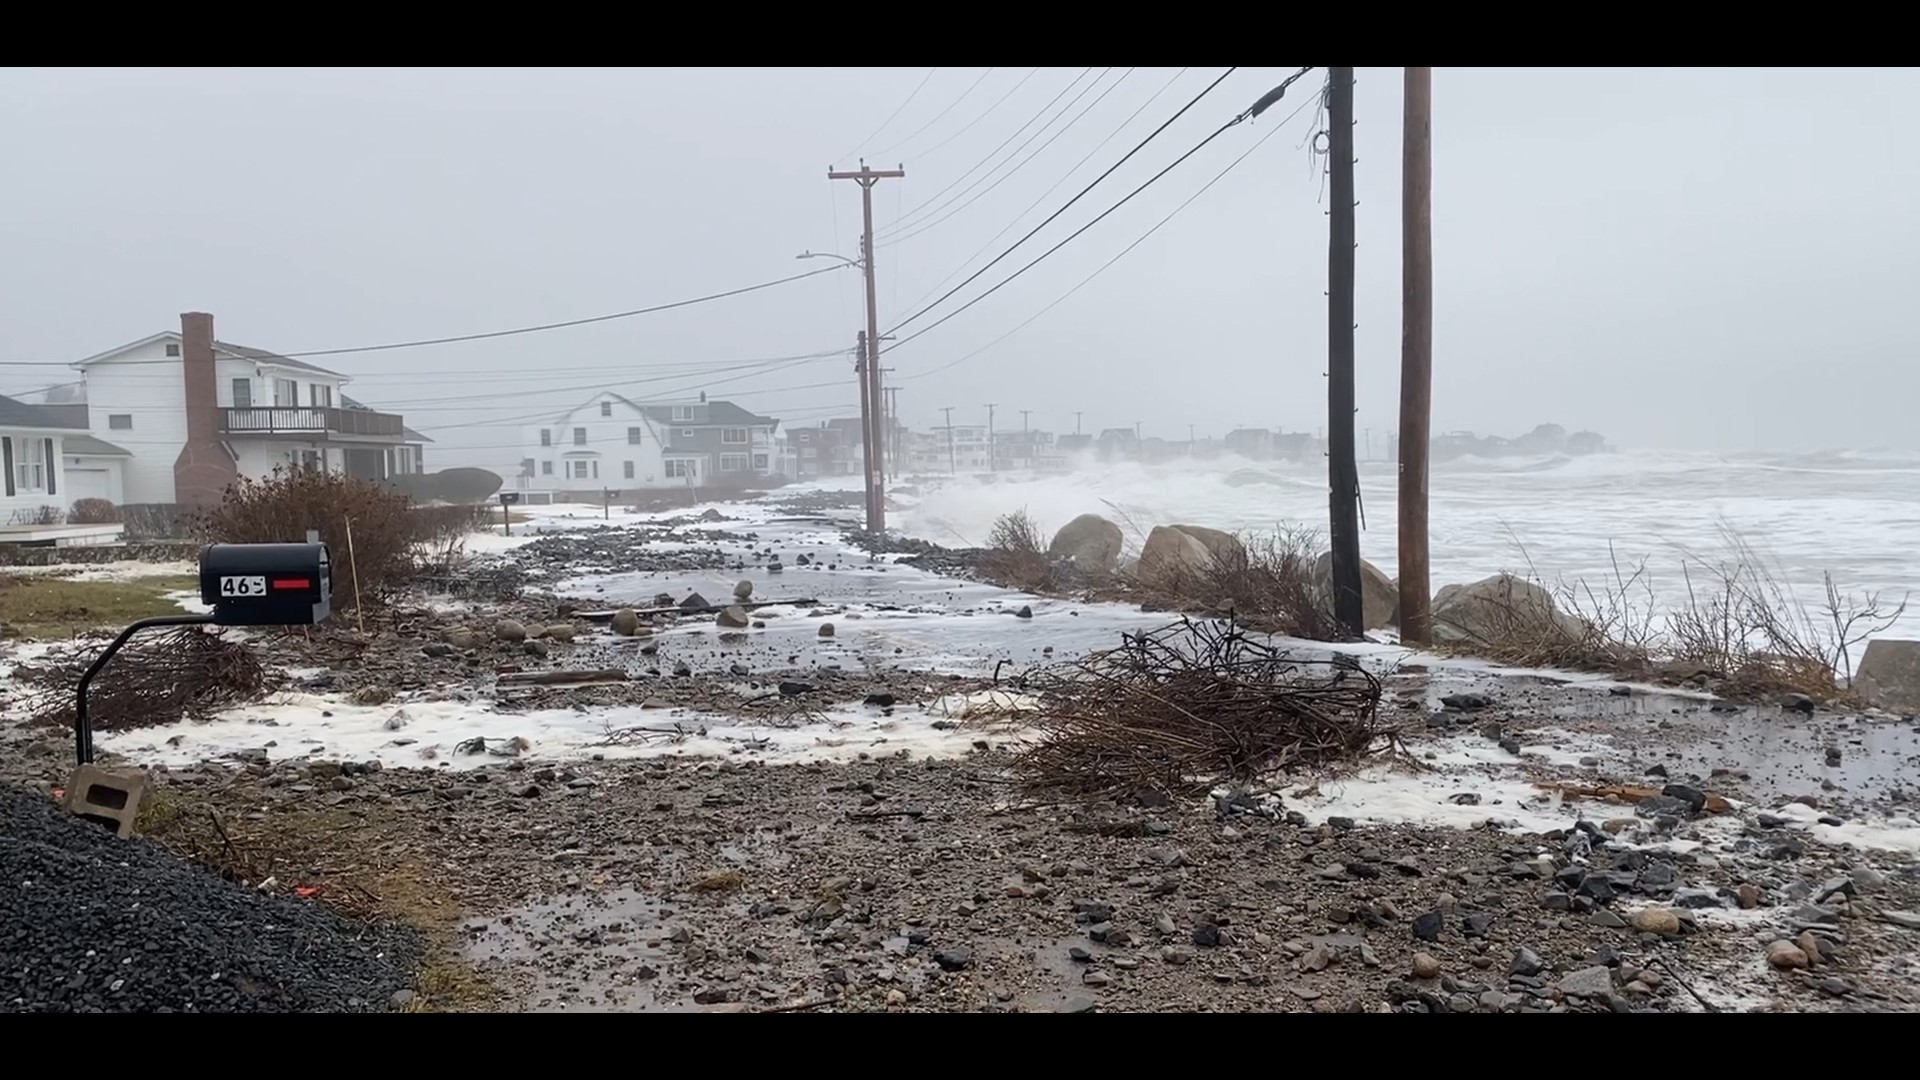 Debris covers roads in Wells as a record-setting storm impacts Maine on Saturday.